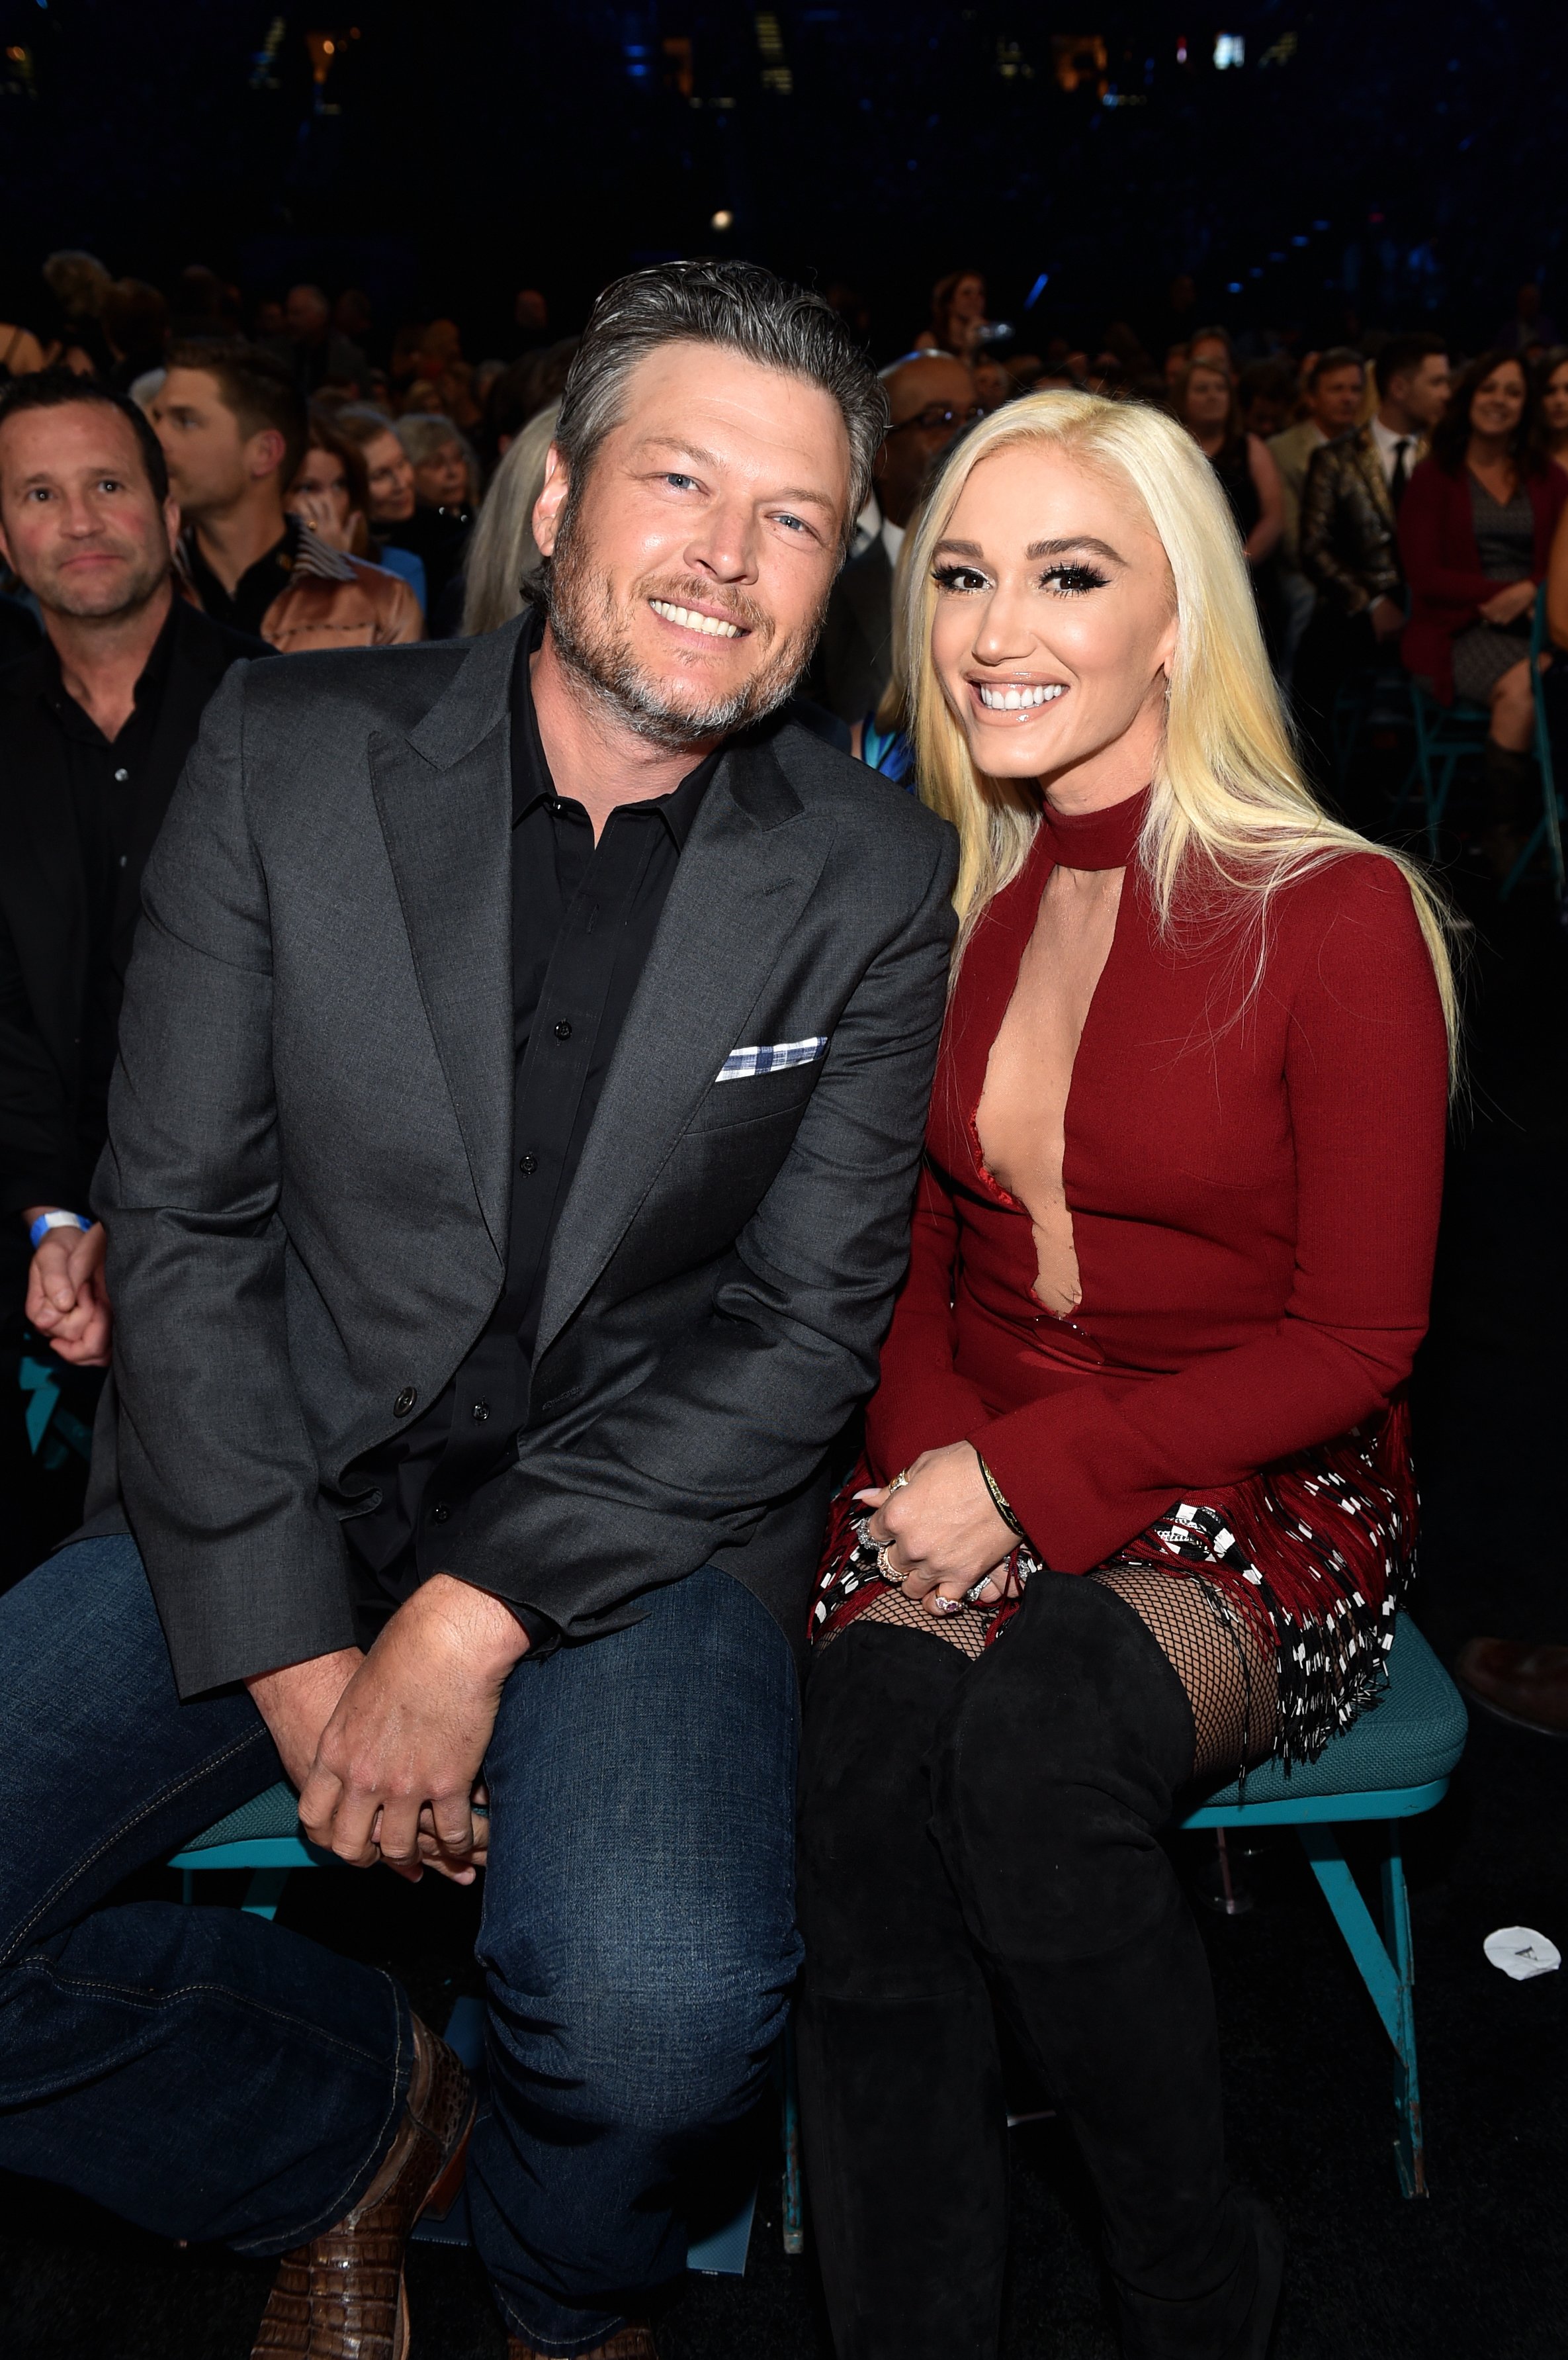 Blake Shelton and Gwen Stefani attend the 53rd Academy of Country Music Awards at MGM Grand Garden Arena on April 15, 2018. | Photo: Getty Images